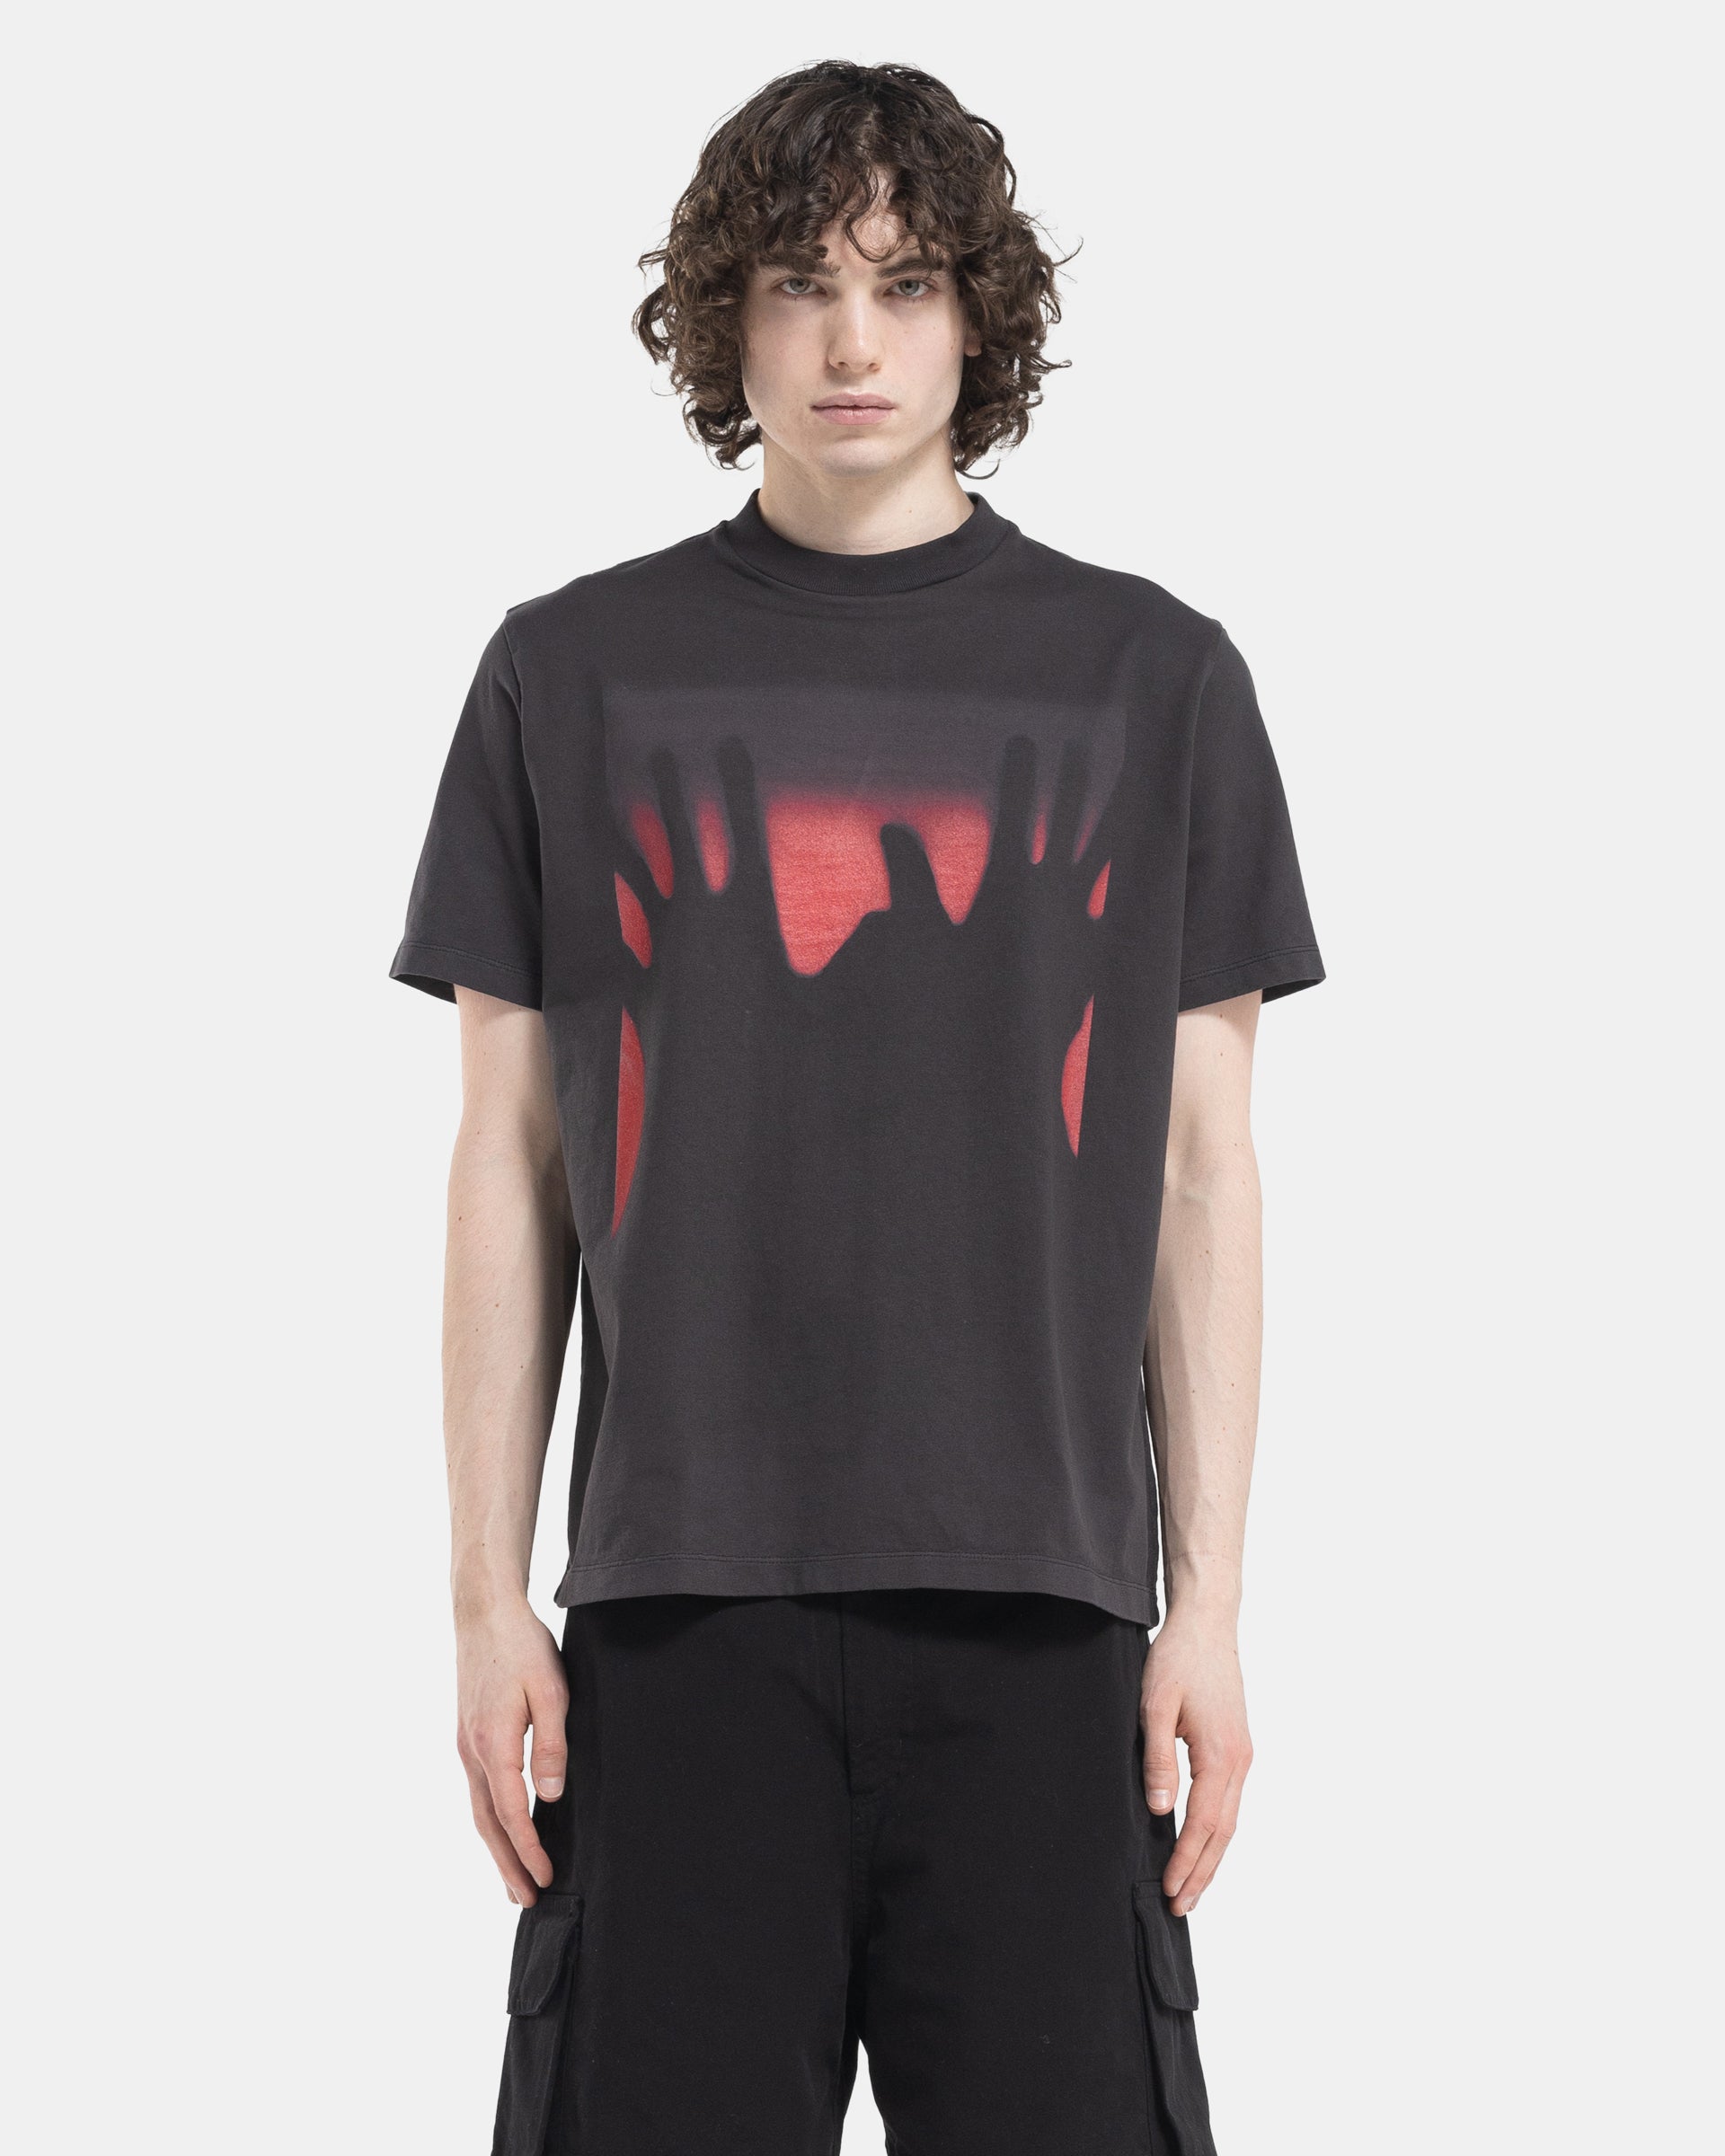 Box T-Shirt in Red Taste of Hands Print